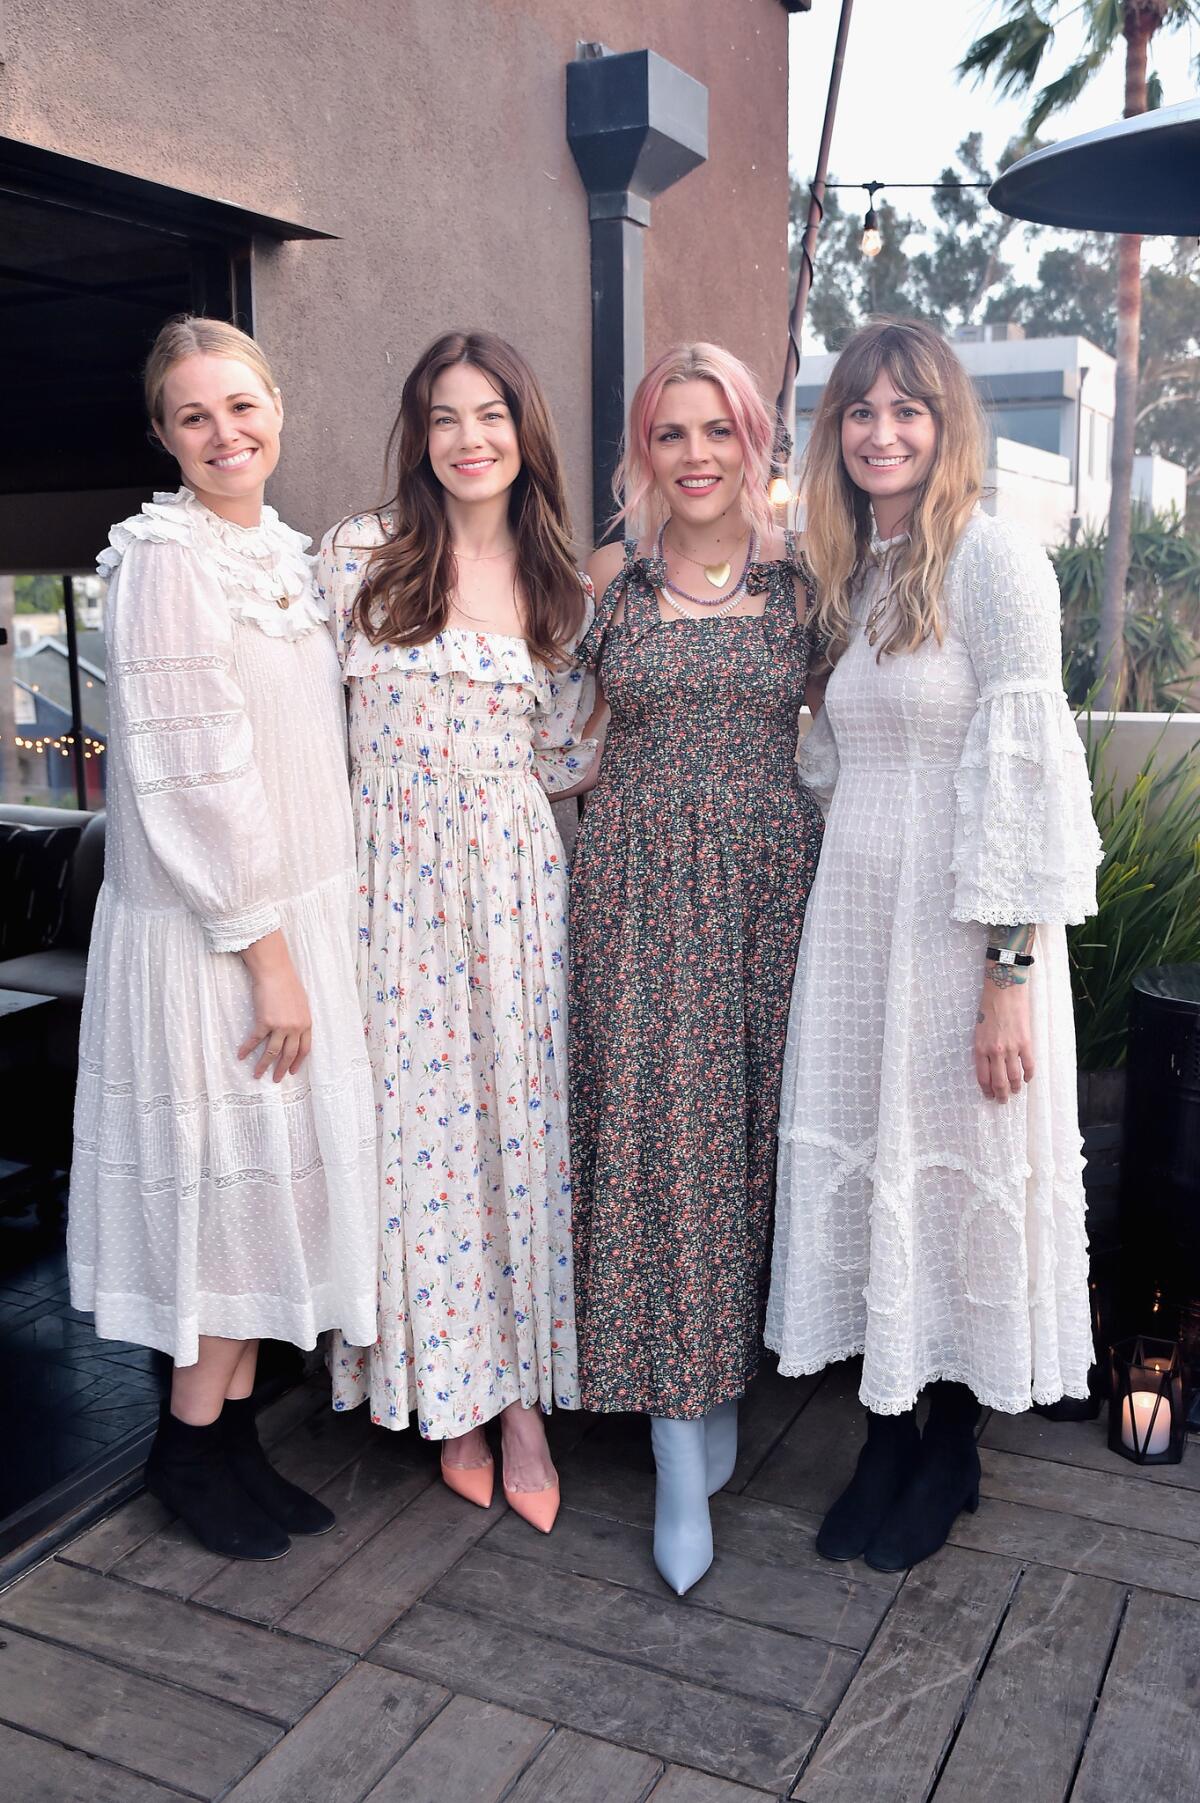 Katherine Kleveland, from left, Michelle Monaghan, Busy Philipps and Margaret Kleveland at Gjelina in Venice on Monday night.